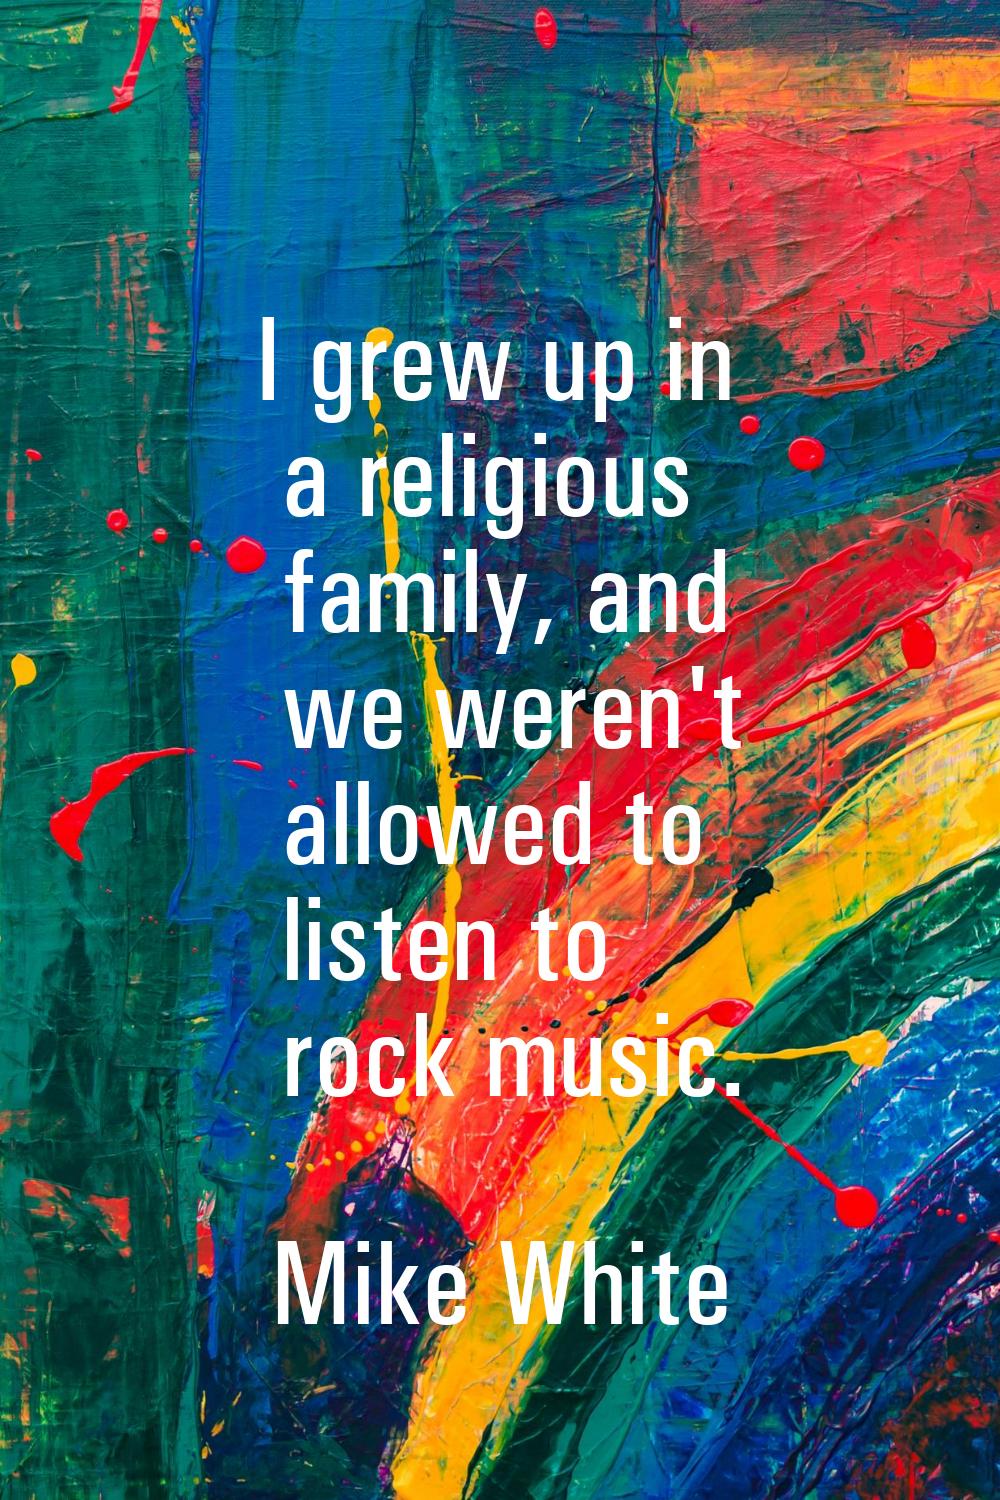 I grew up in a religious family, and we weren't allowed to listen to rock music.